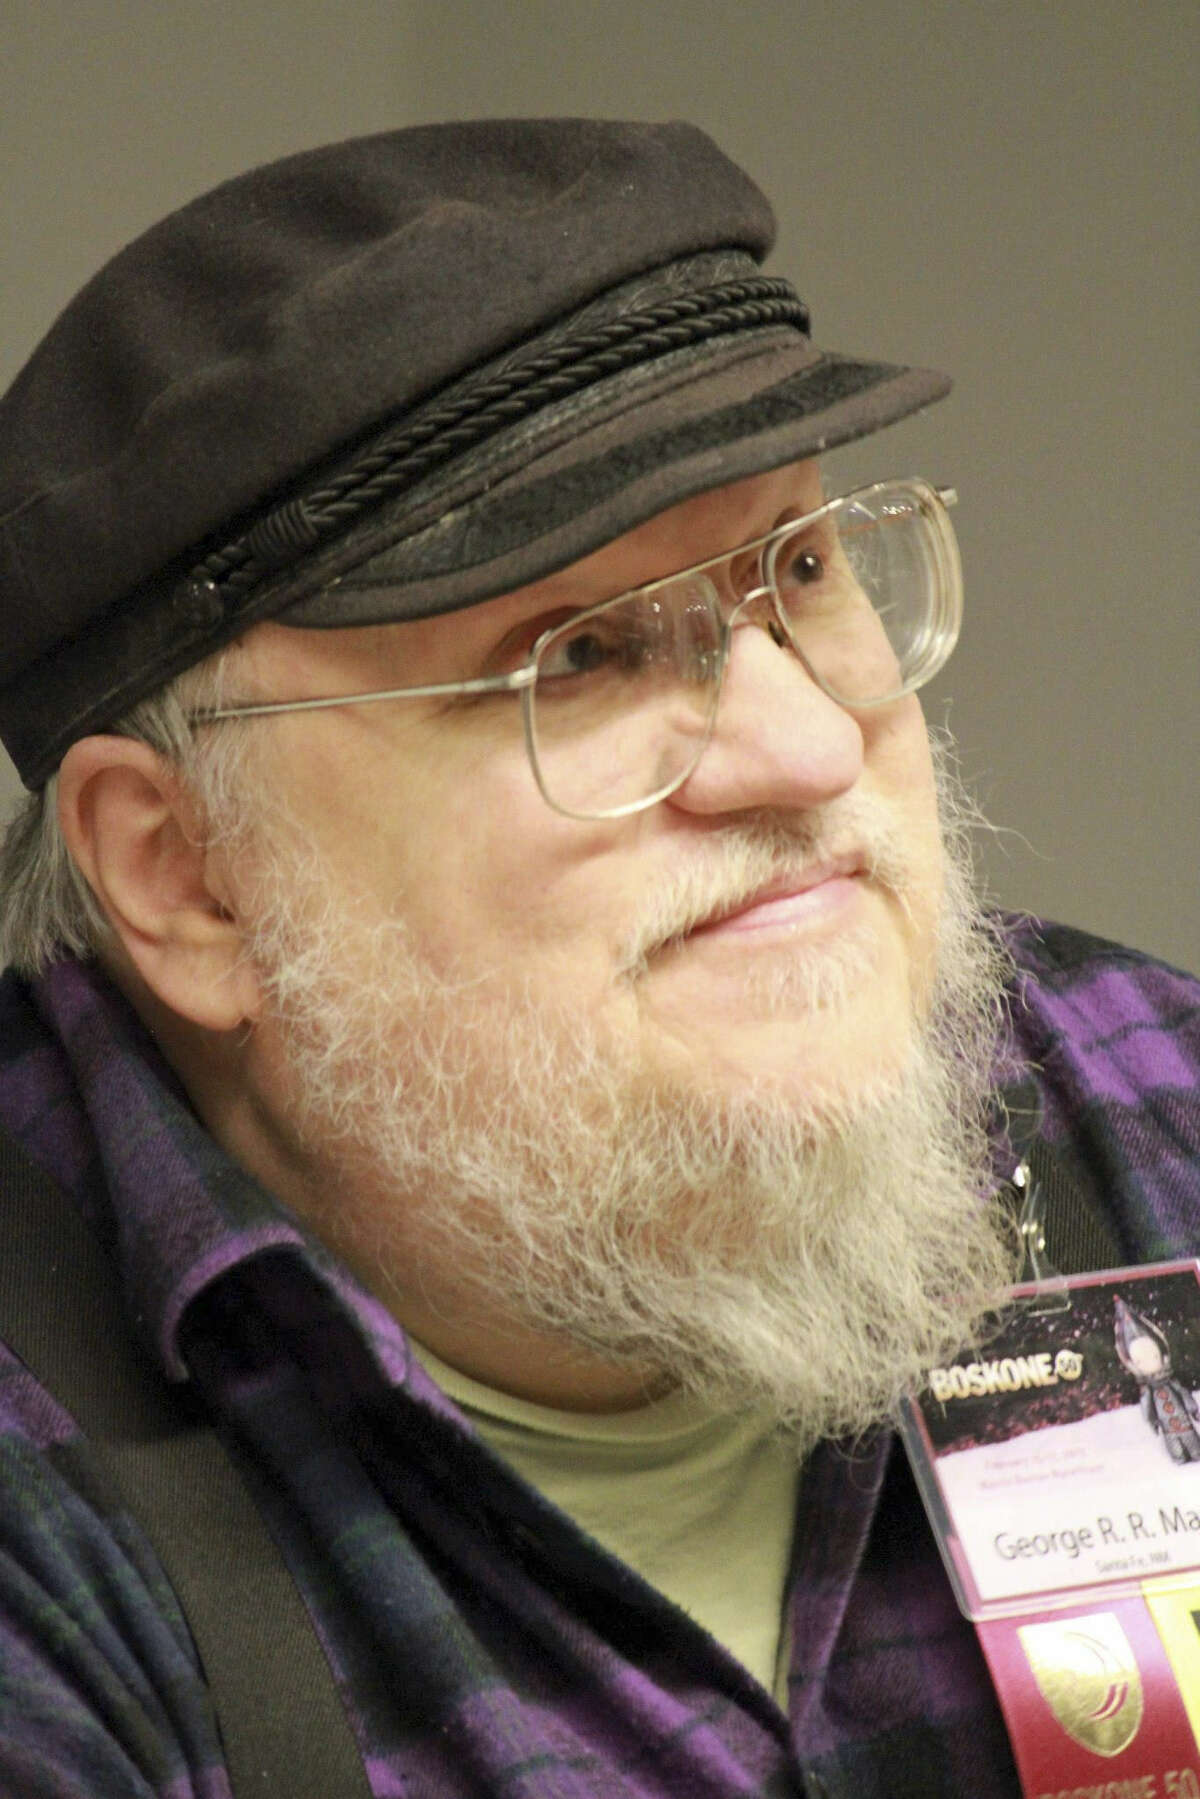 Fantasy novelist George R.R. Martin will be at Worldcon.